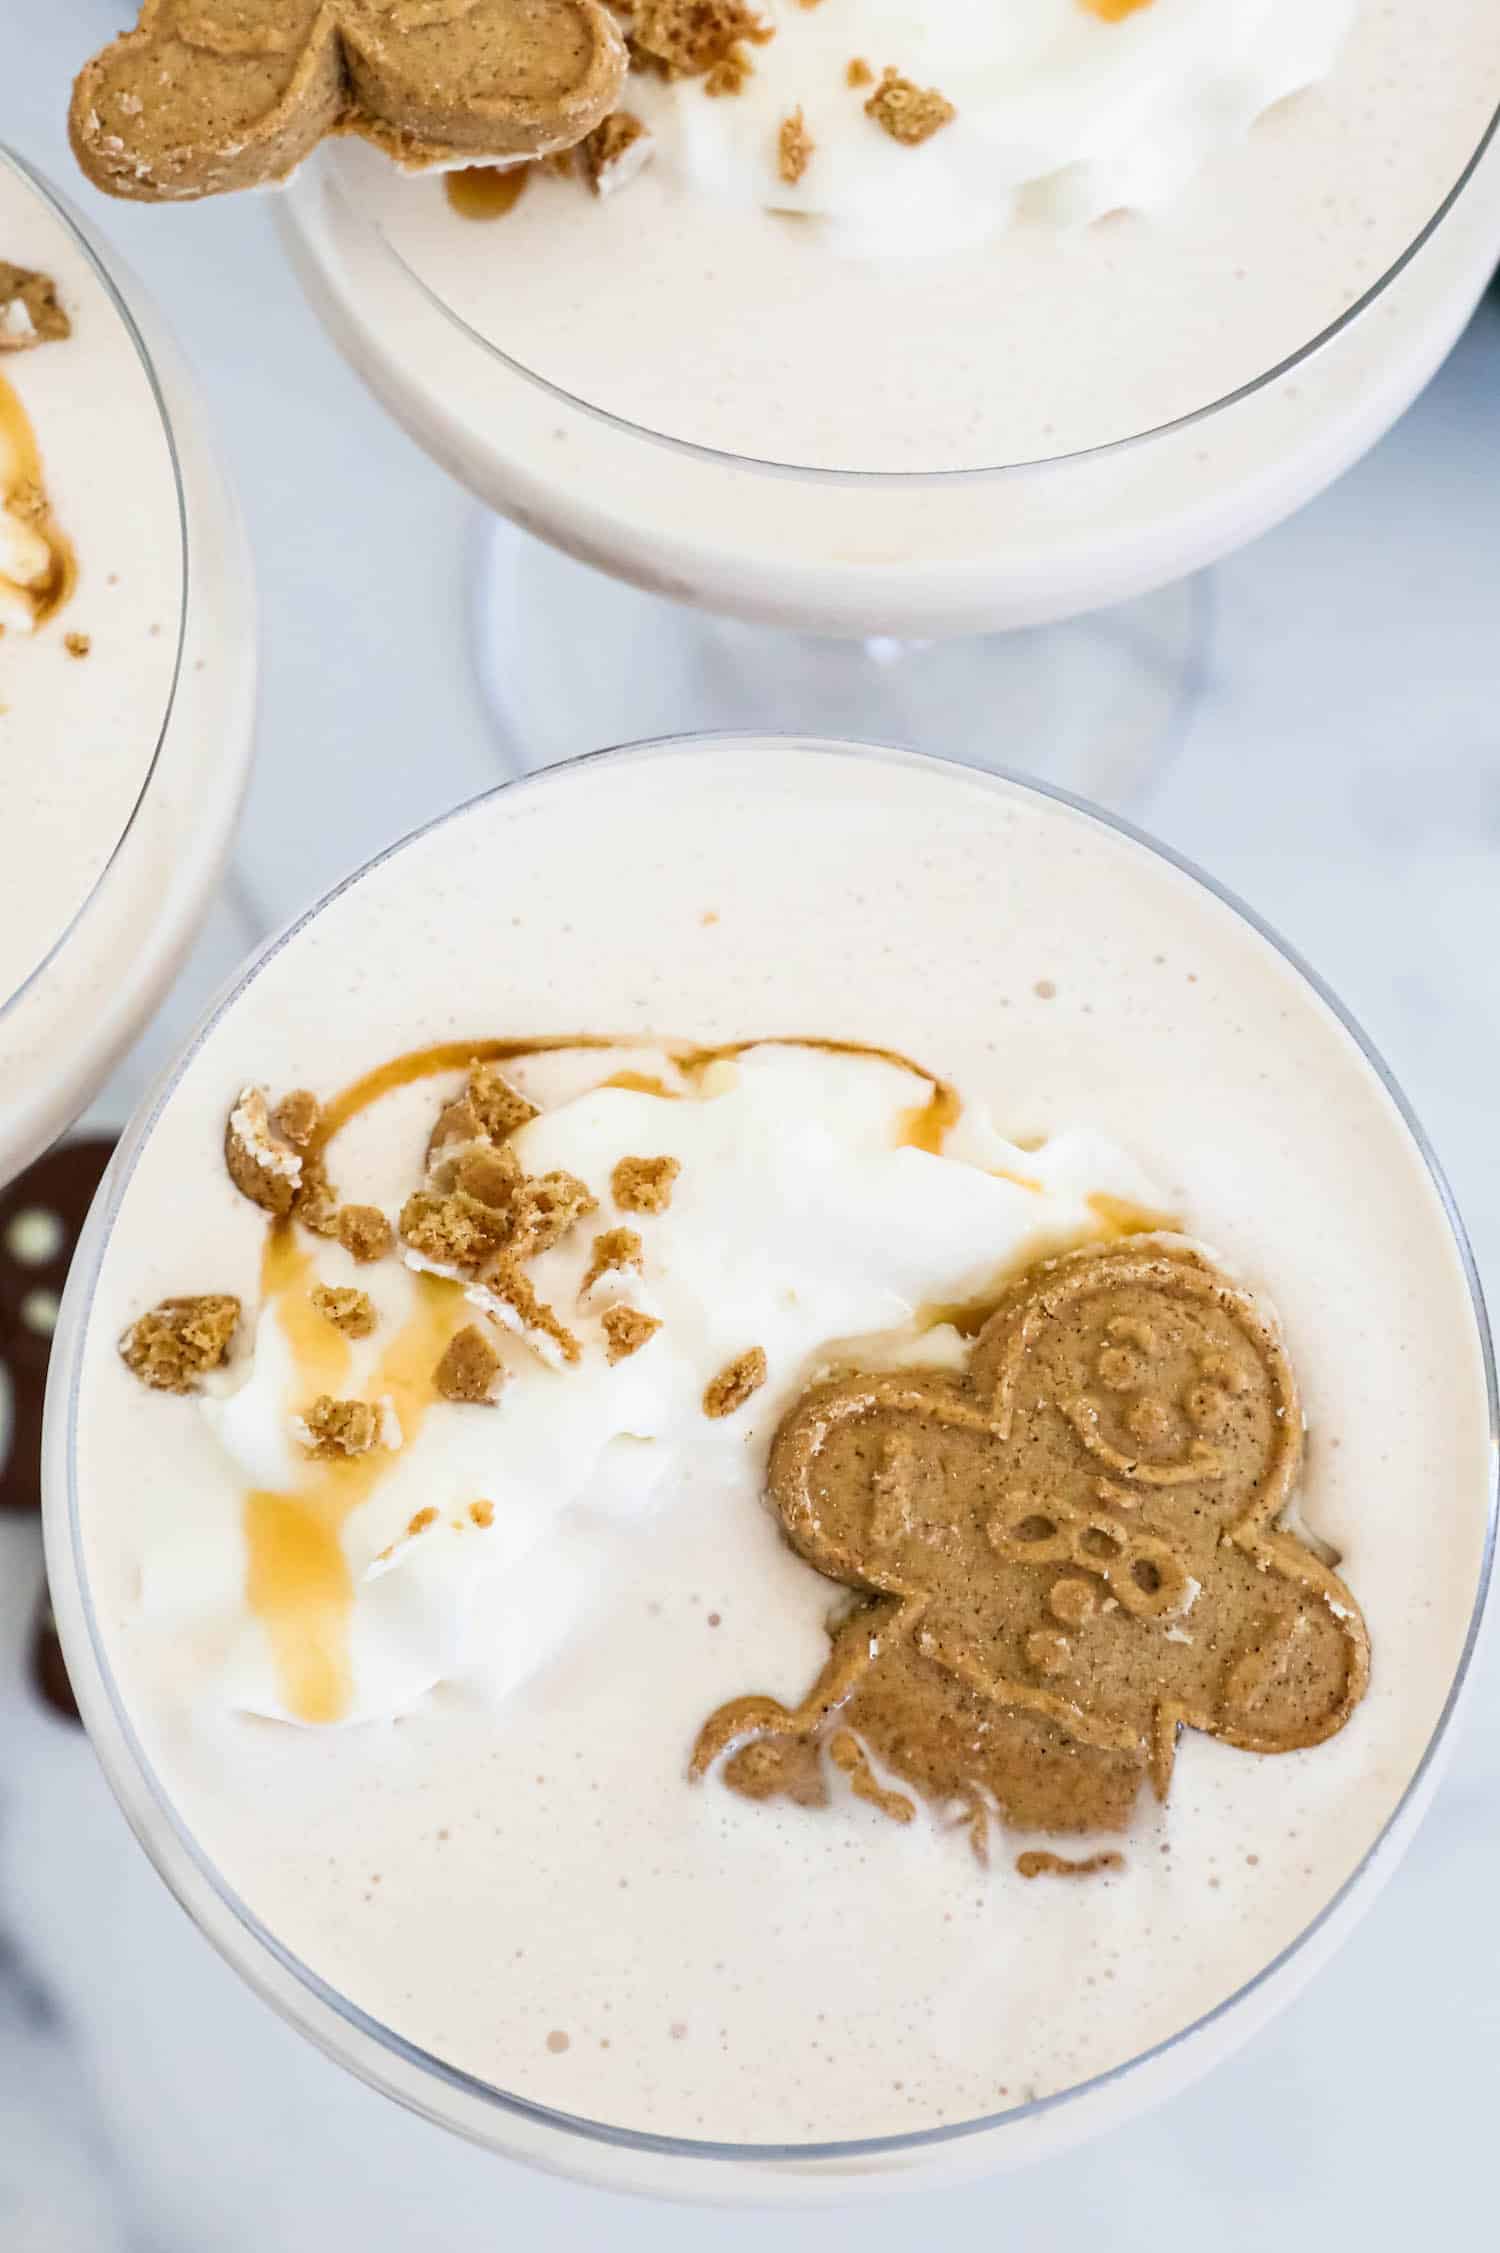 Gingerbread martini with whipped cream and gingerbread cookies. The perfect holiday cocktail, this gingerbread martini is a festive blend of warm spices and rich flavors. Topped with a dollop